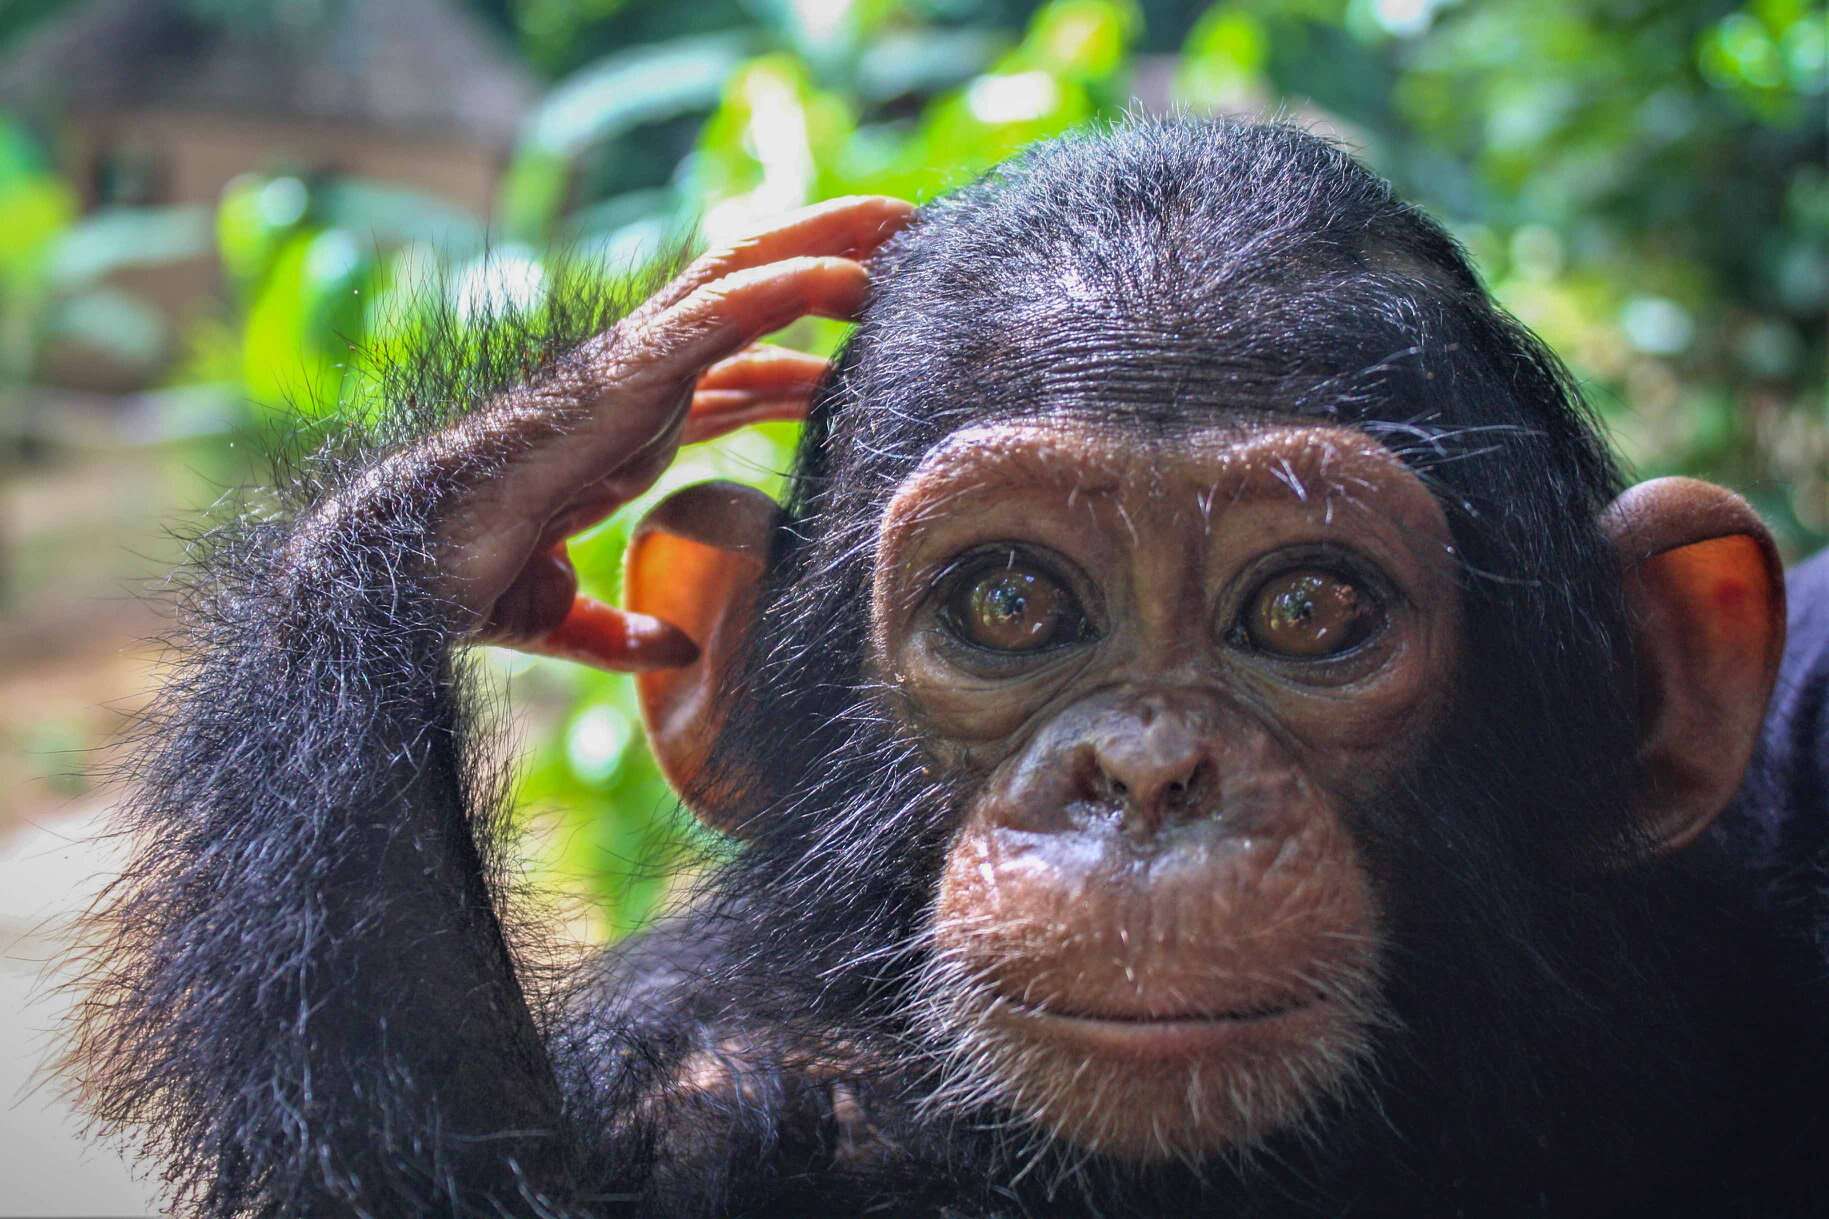 Orphaned baby chimp saved in Cameroon